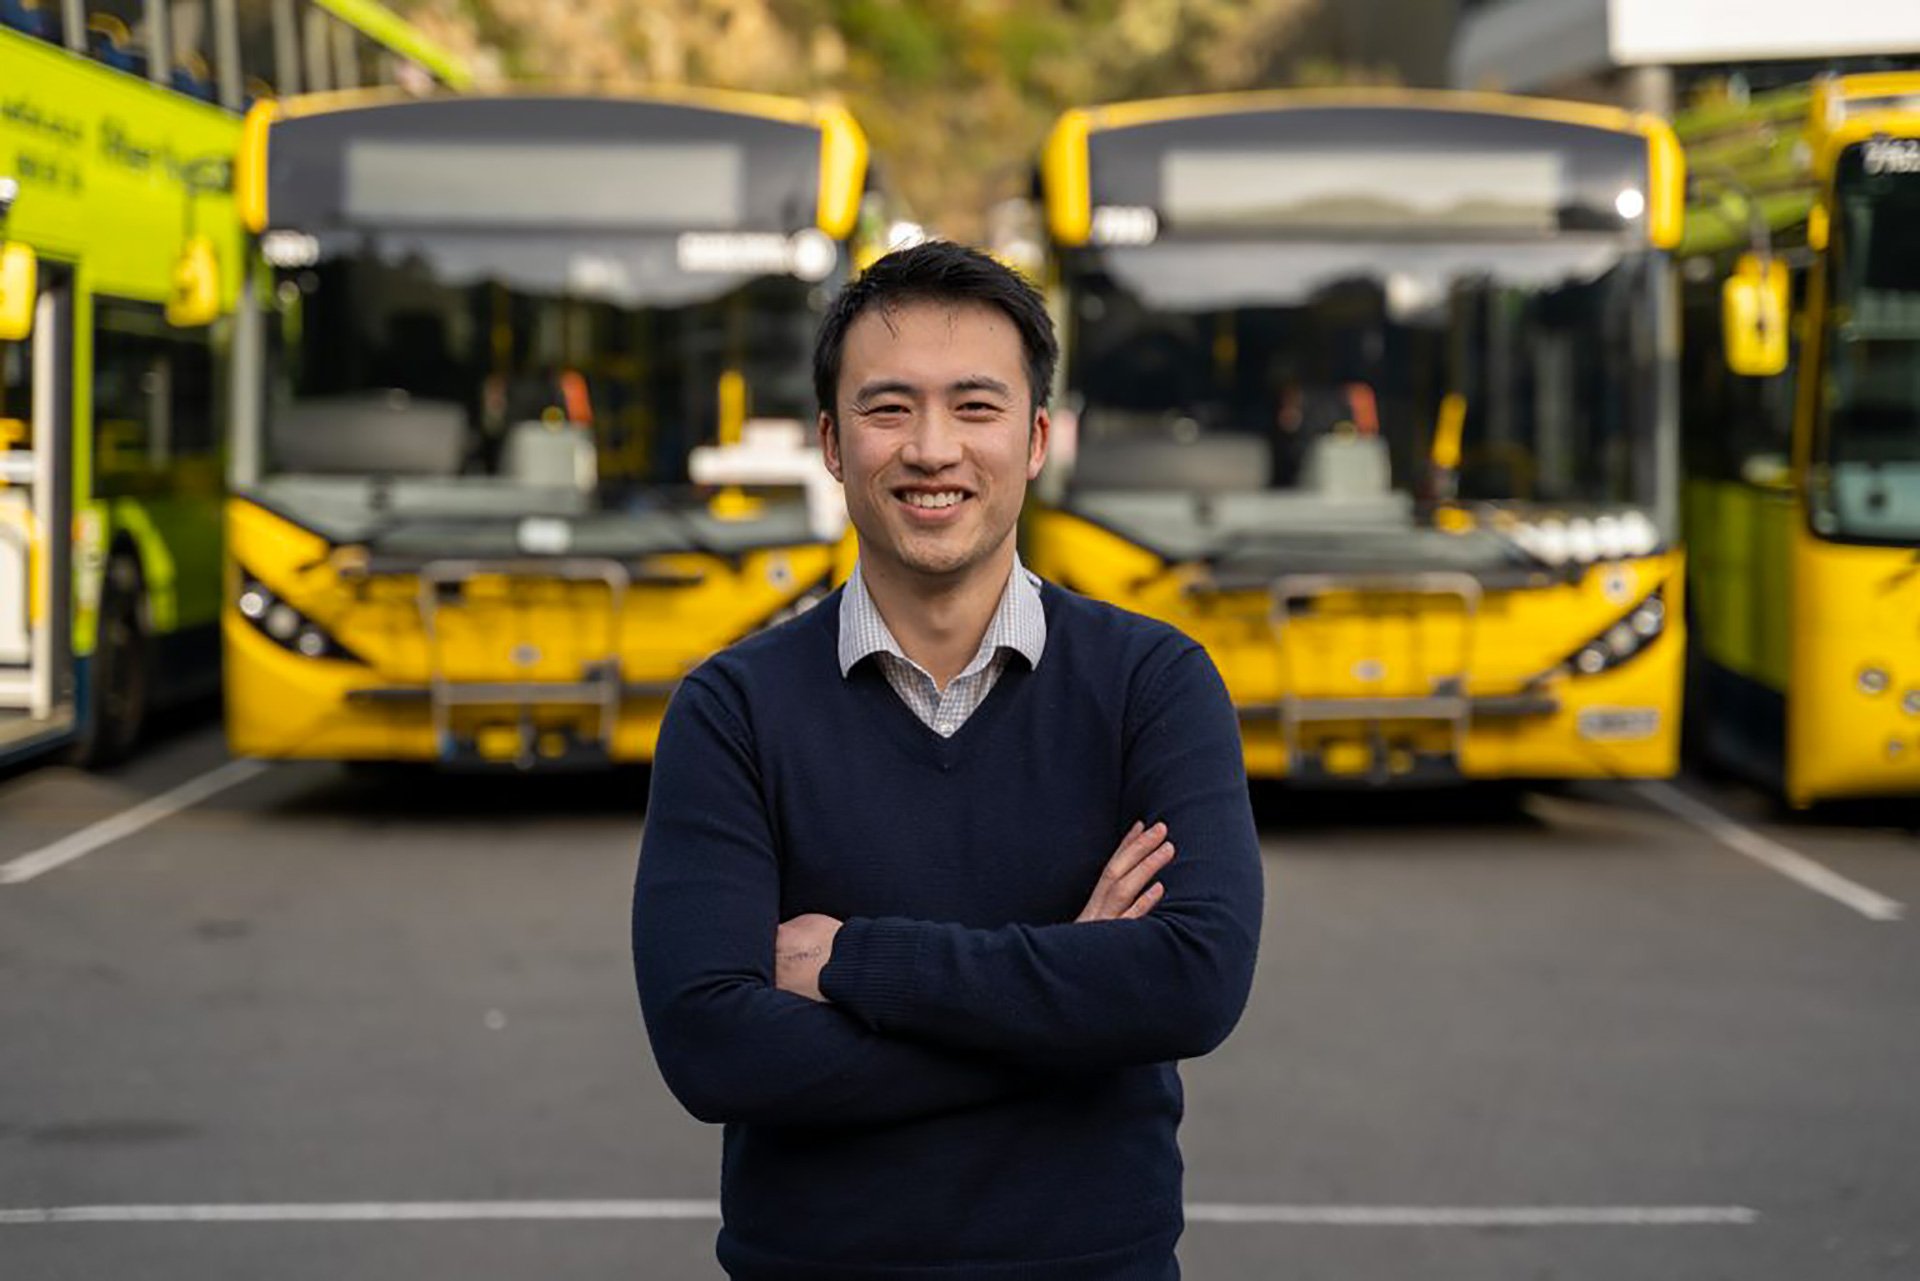 smiling man with crossed arms and blue sweater blurred background with yellow bus